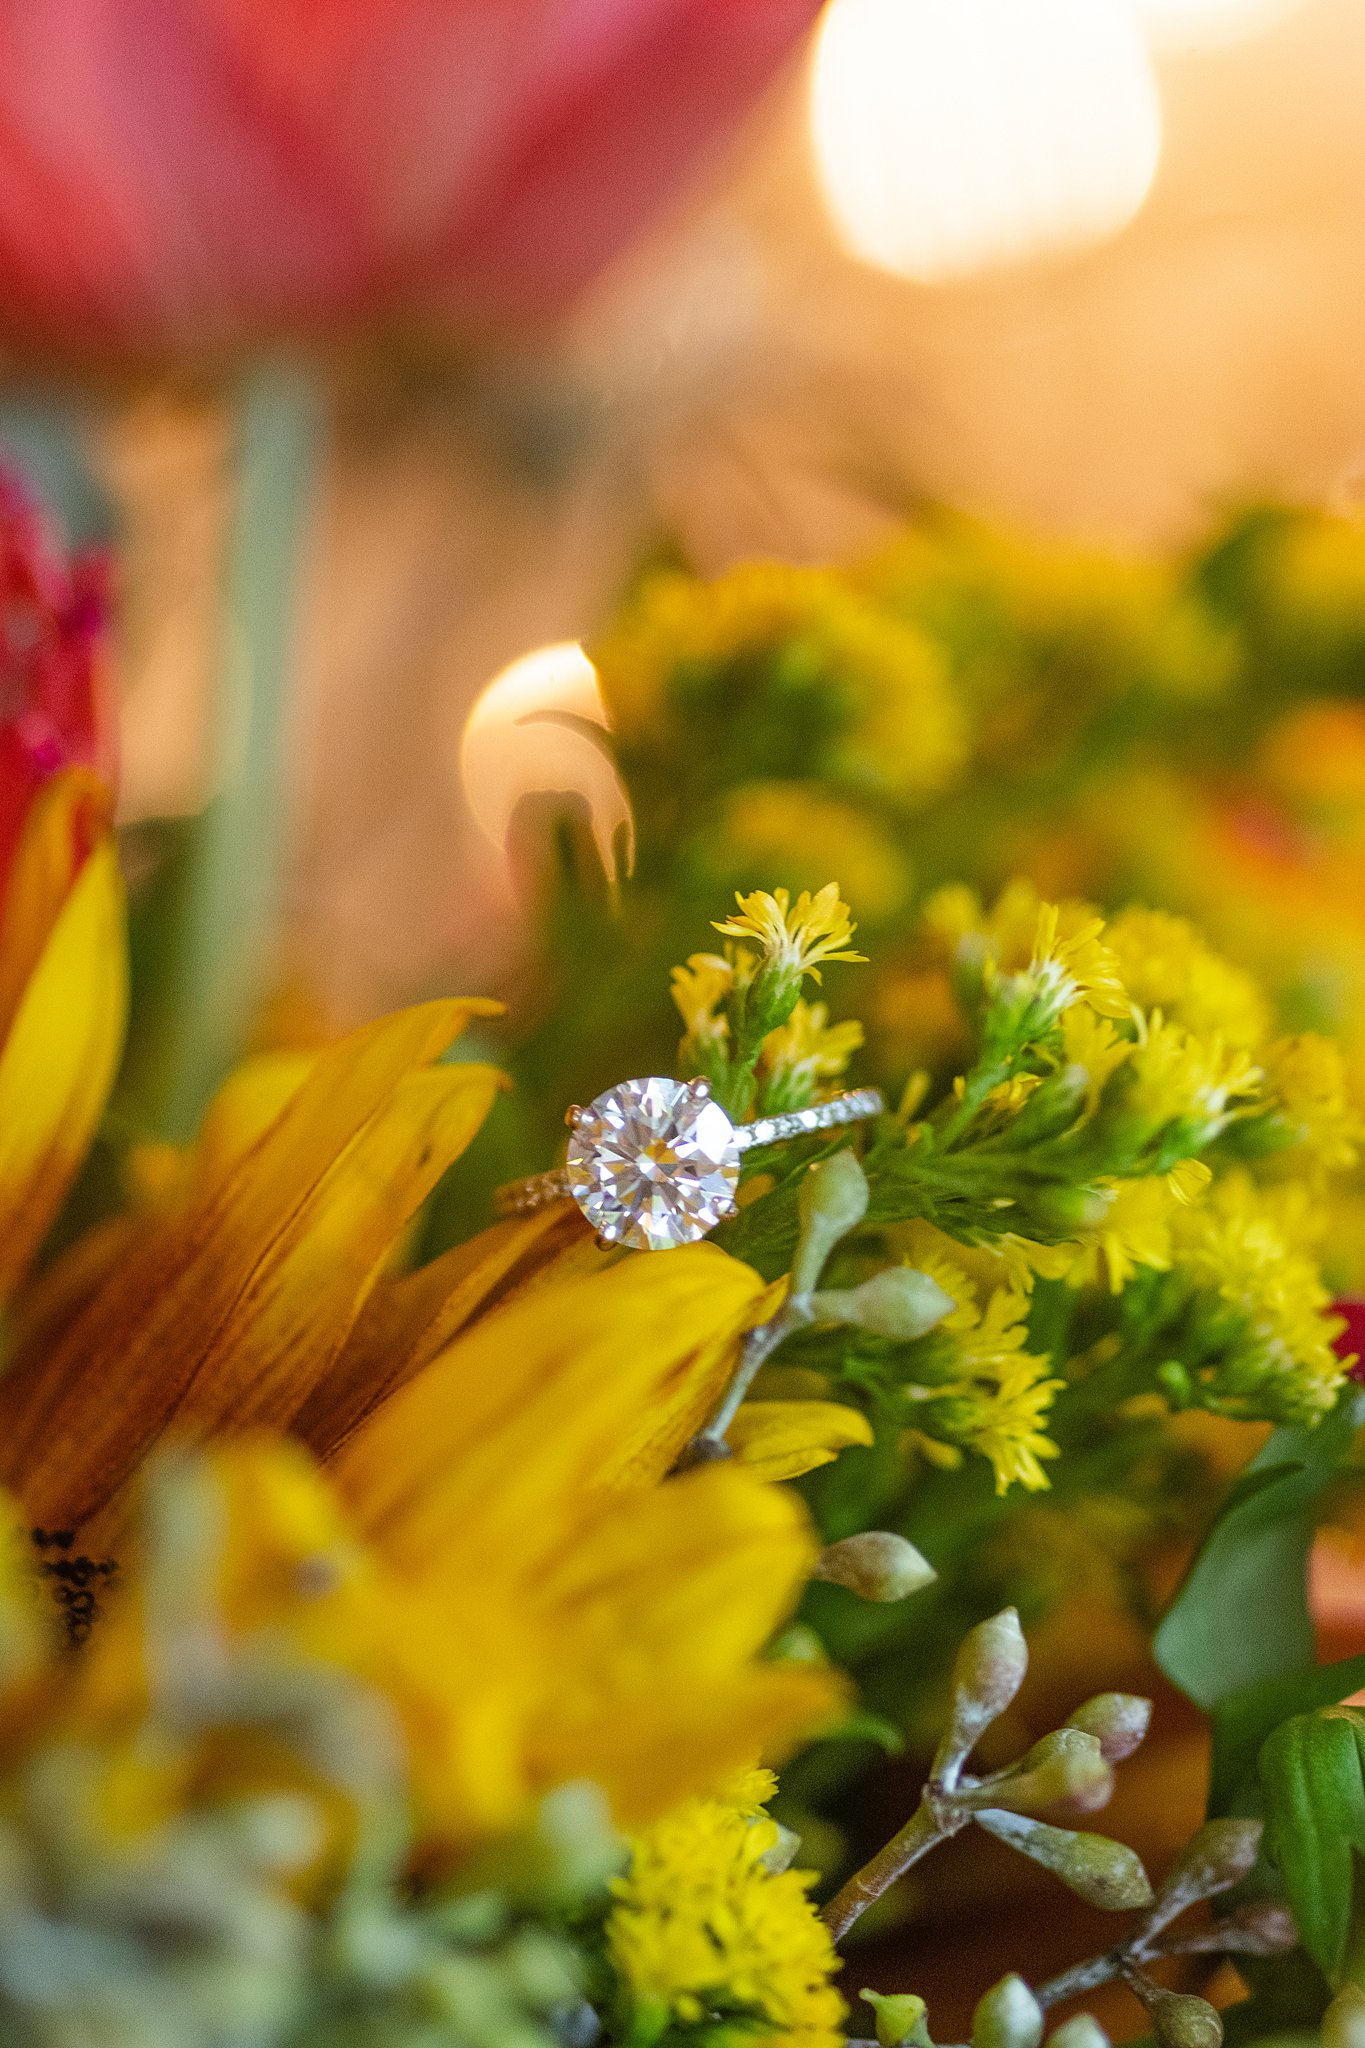 An engagement ring sits on some colorful flowers wedding venues in northern virginia